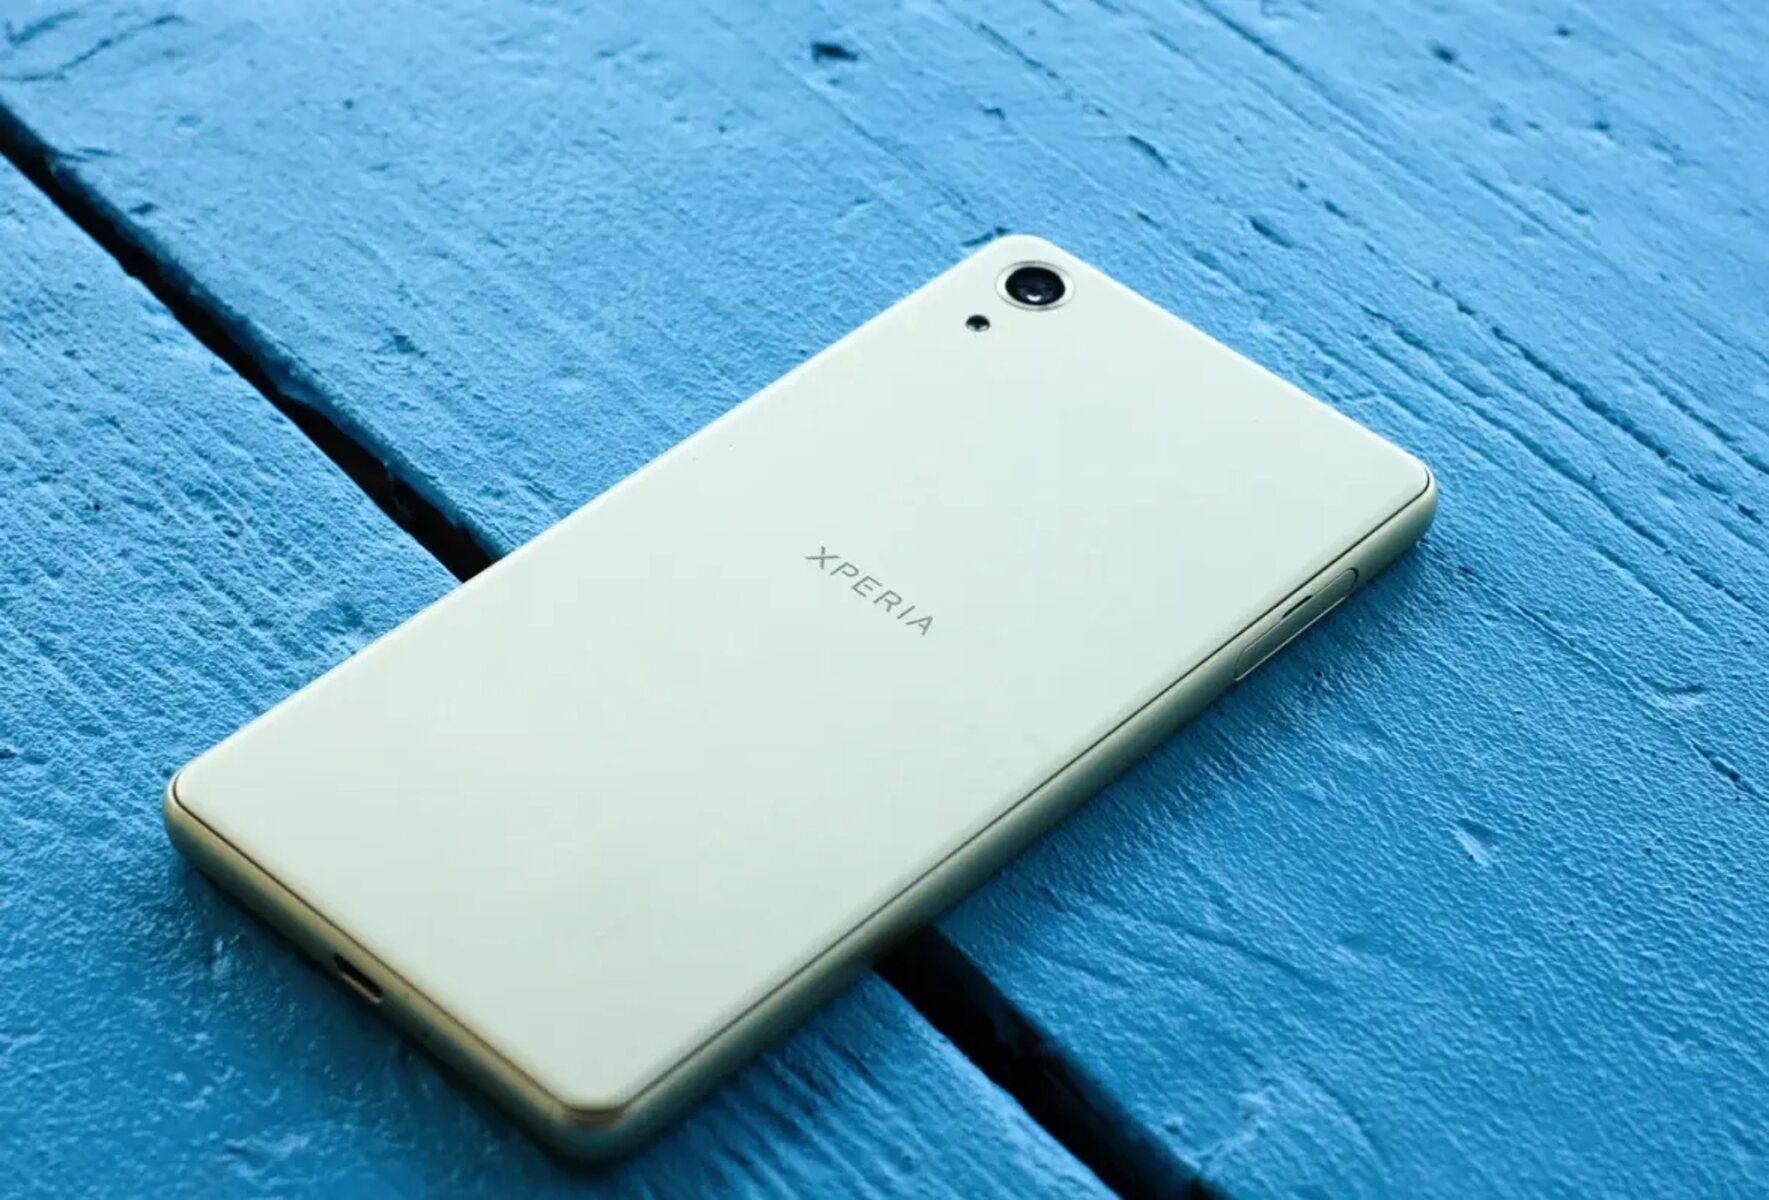 xperia-mini-reset-guide-resolving-issues